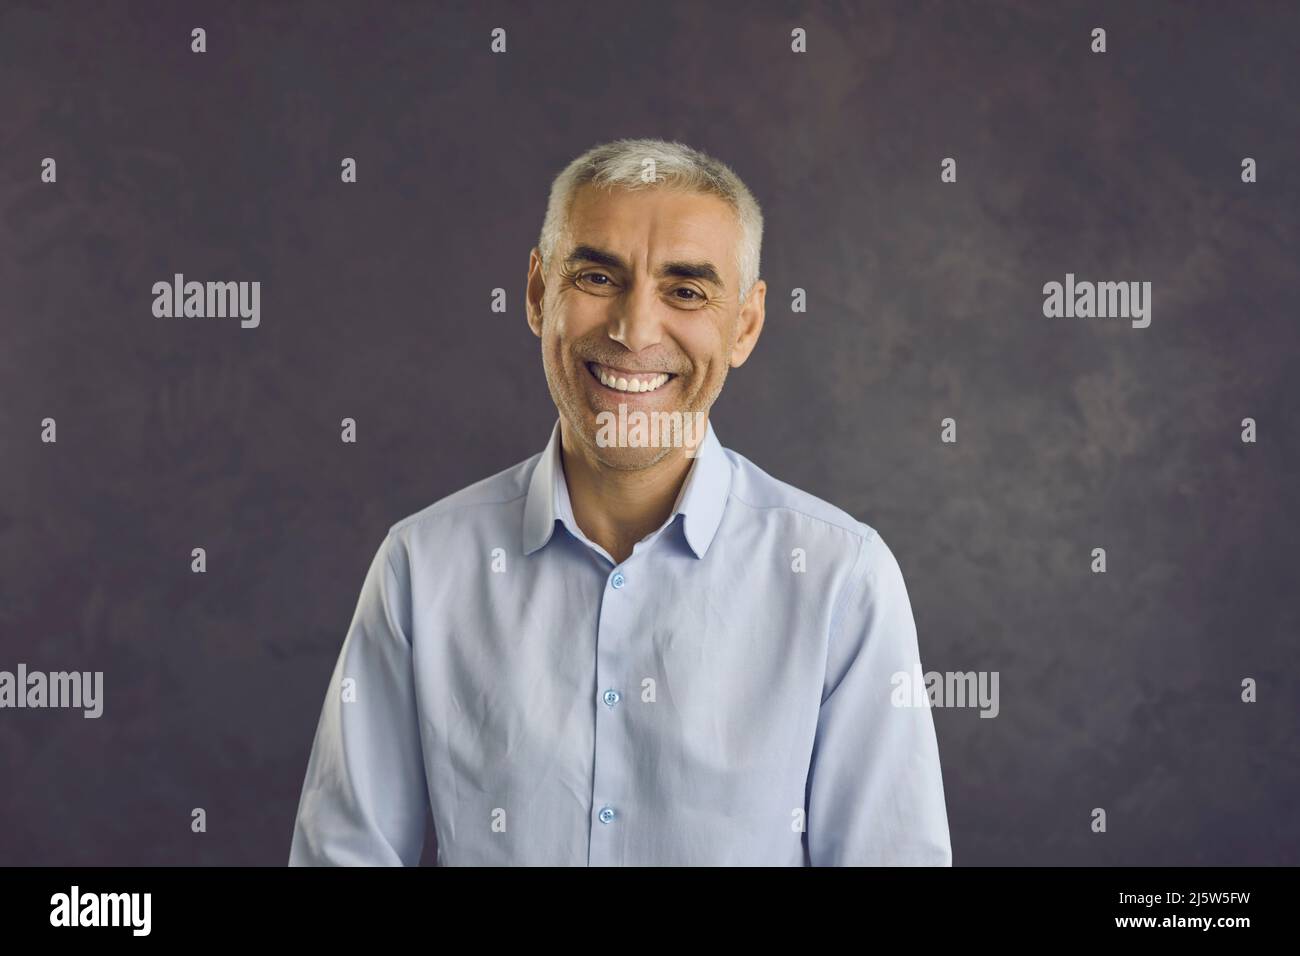 Portrait of smiling middle-aged Caucasian man look at camera Stock Photo